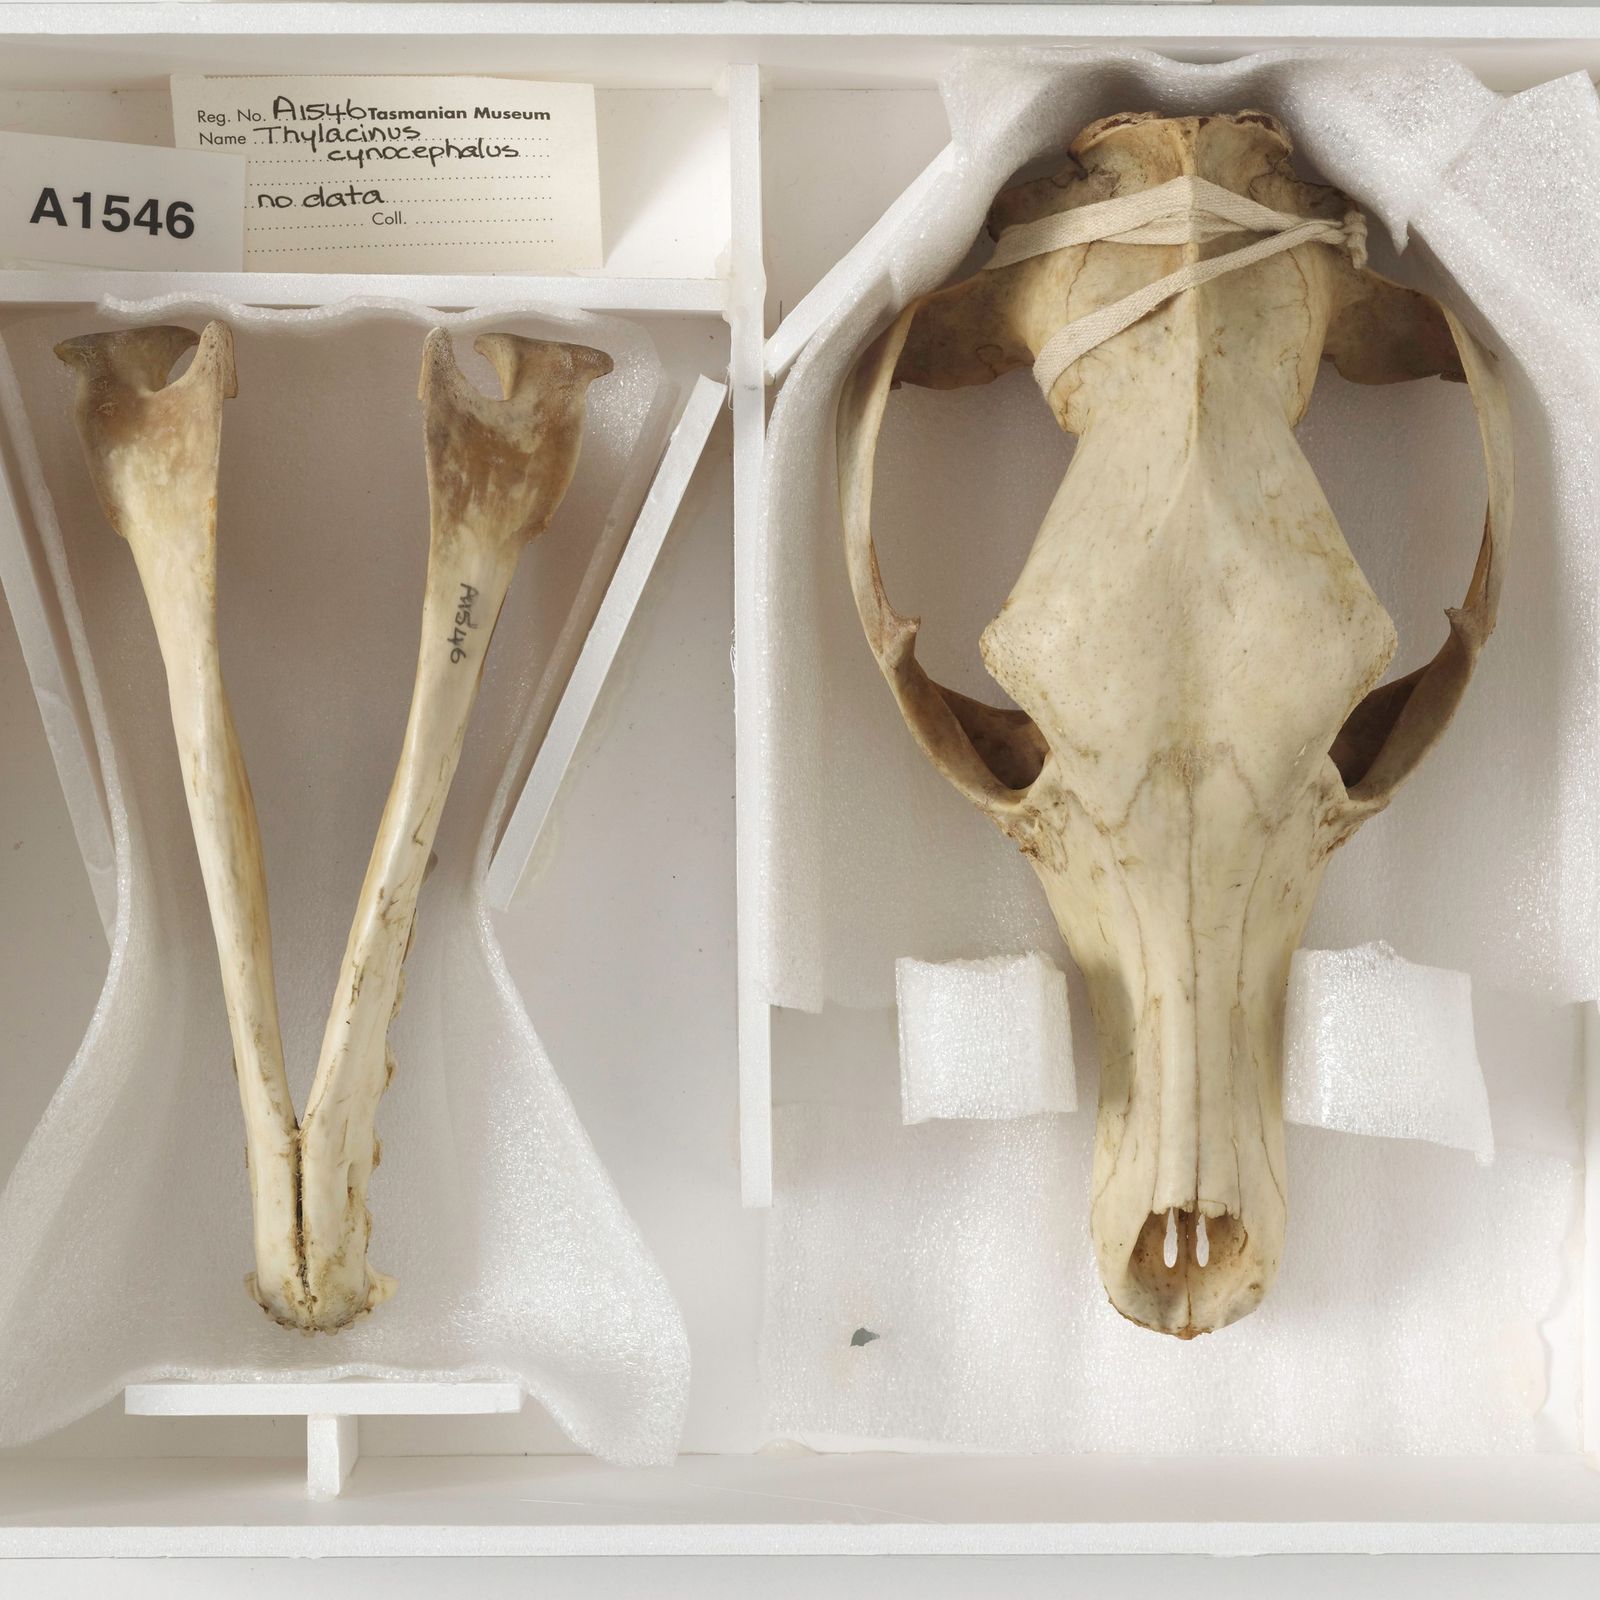 Remains of Last Surviving Tasmanian Tiger Discovered in Museum Cabinet |  Smart News| Smithsonian Magazine